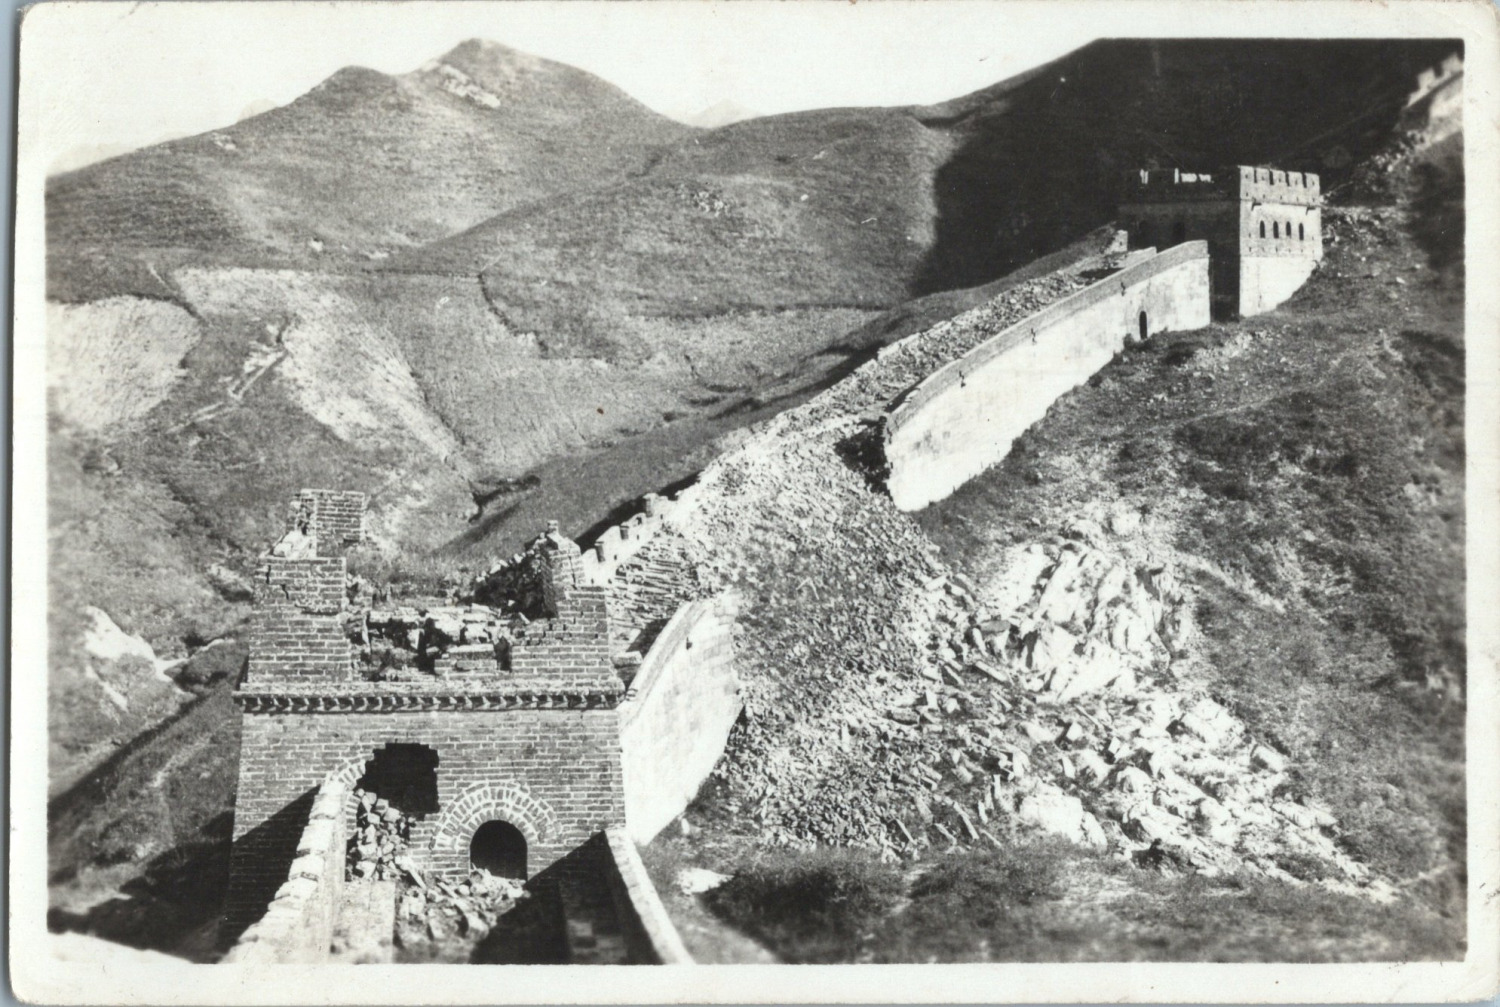 China, A Section of the Great Wall, Vintage Print, ca.1910 Vintage Print